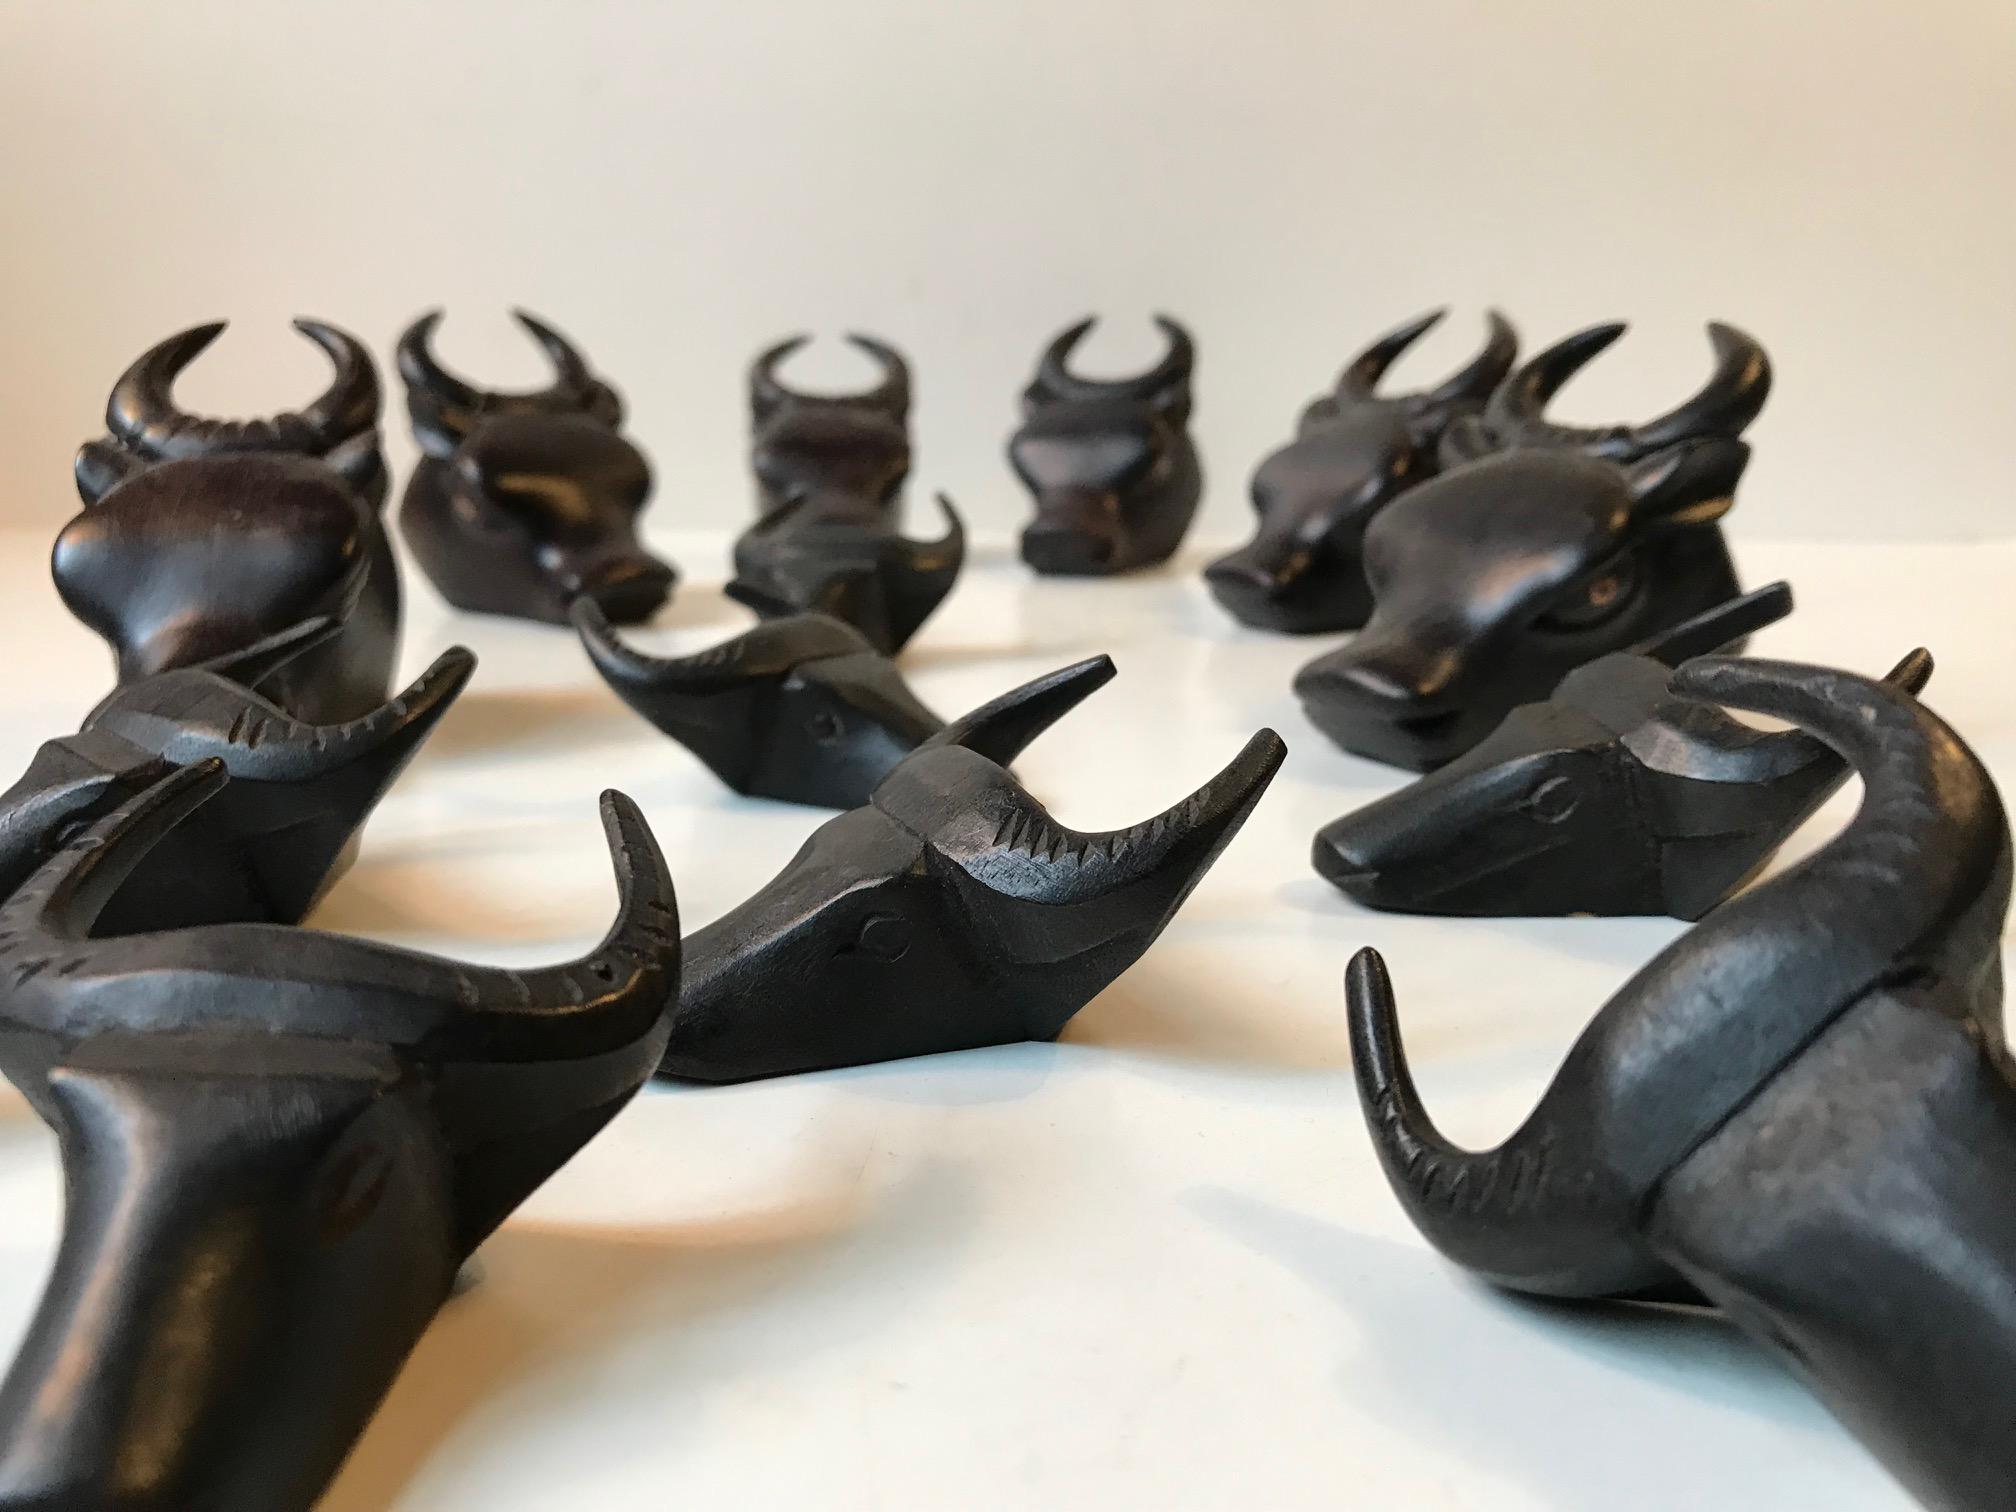 Unusual set of napkin rings hand carved in ebonized wood. There are 6 of the large version with fine detailing and colored eyes. The 8 small ones are more crudely made. This lot was made in Spain during the 1960s or 1970s by a local artisan. For